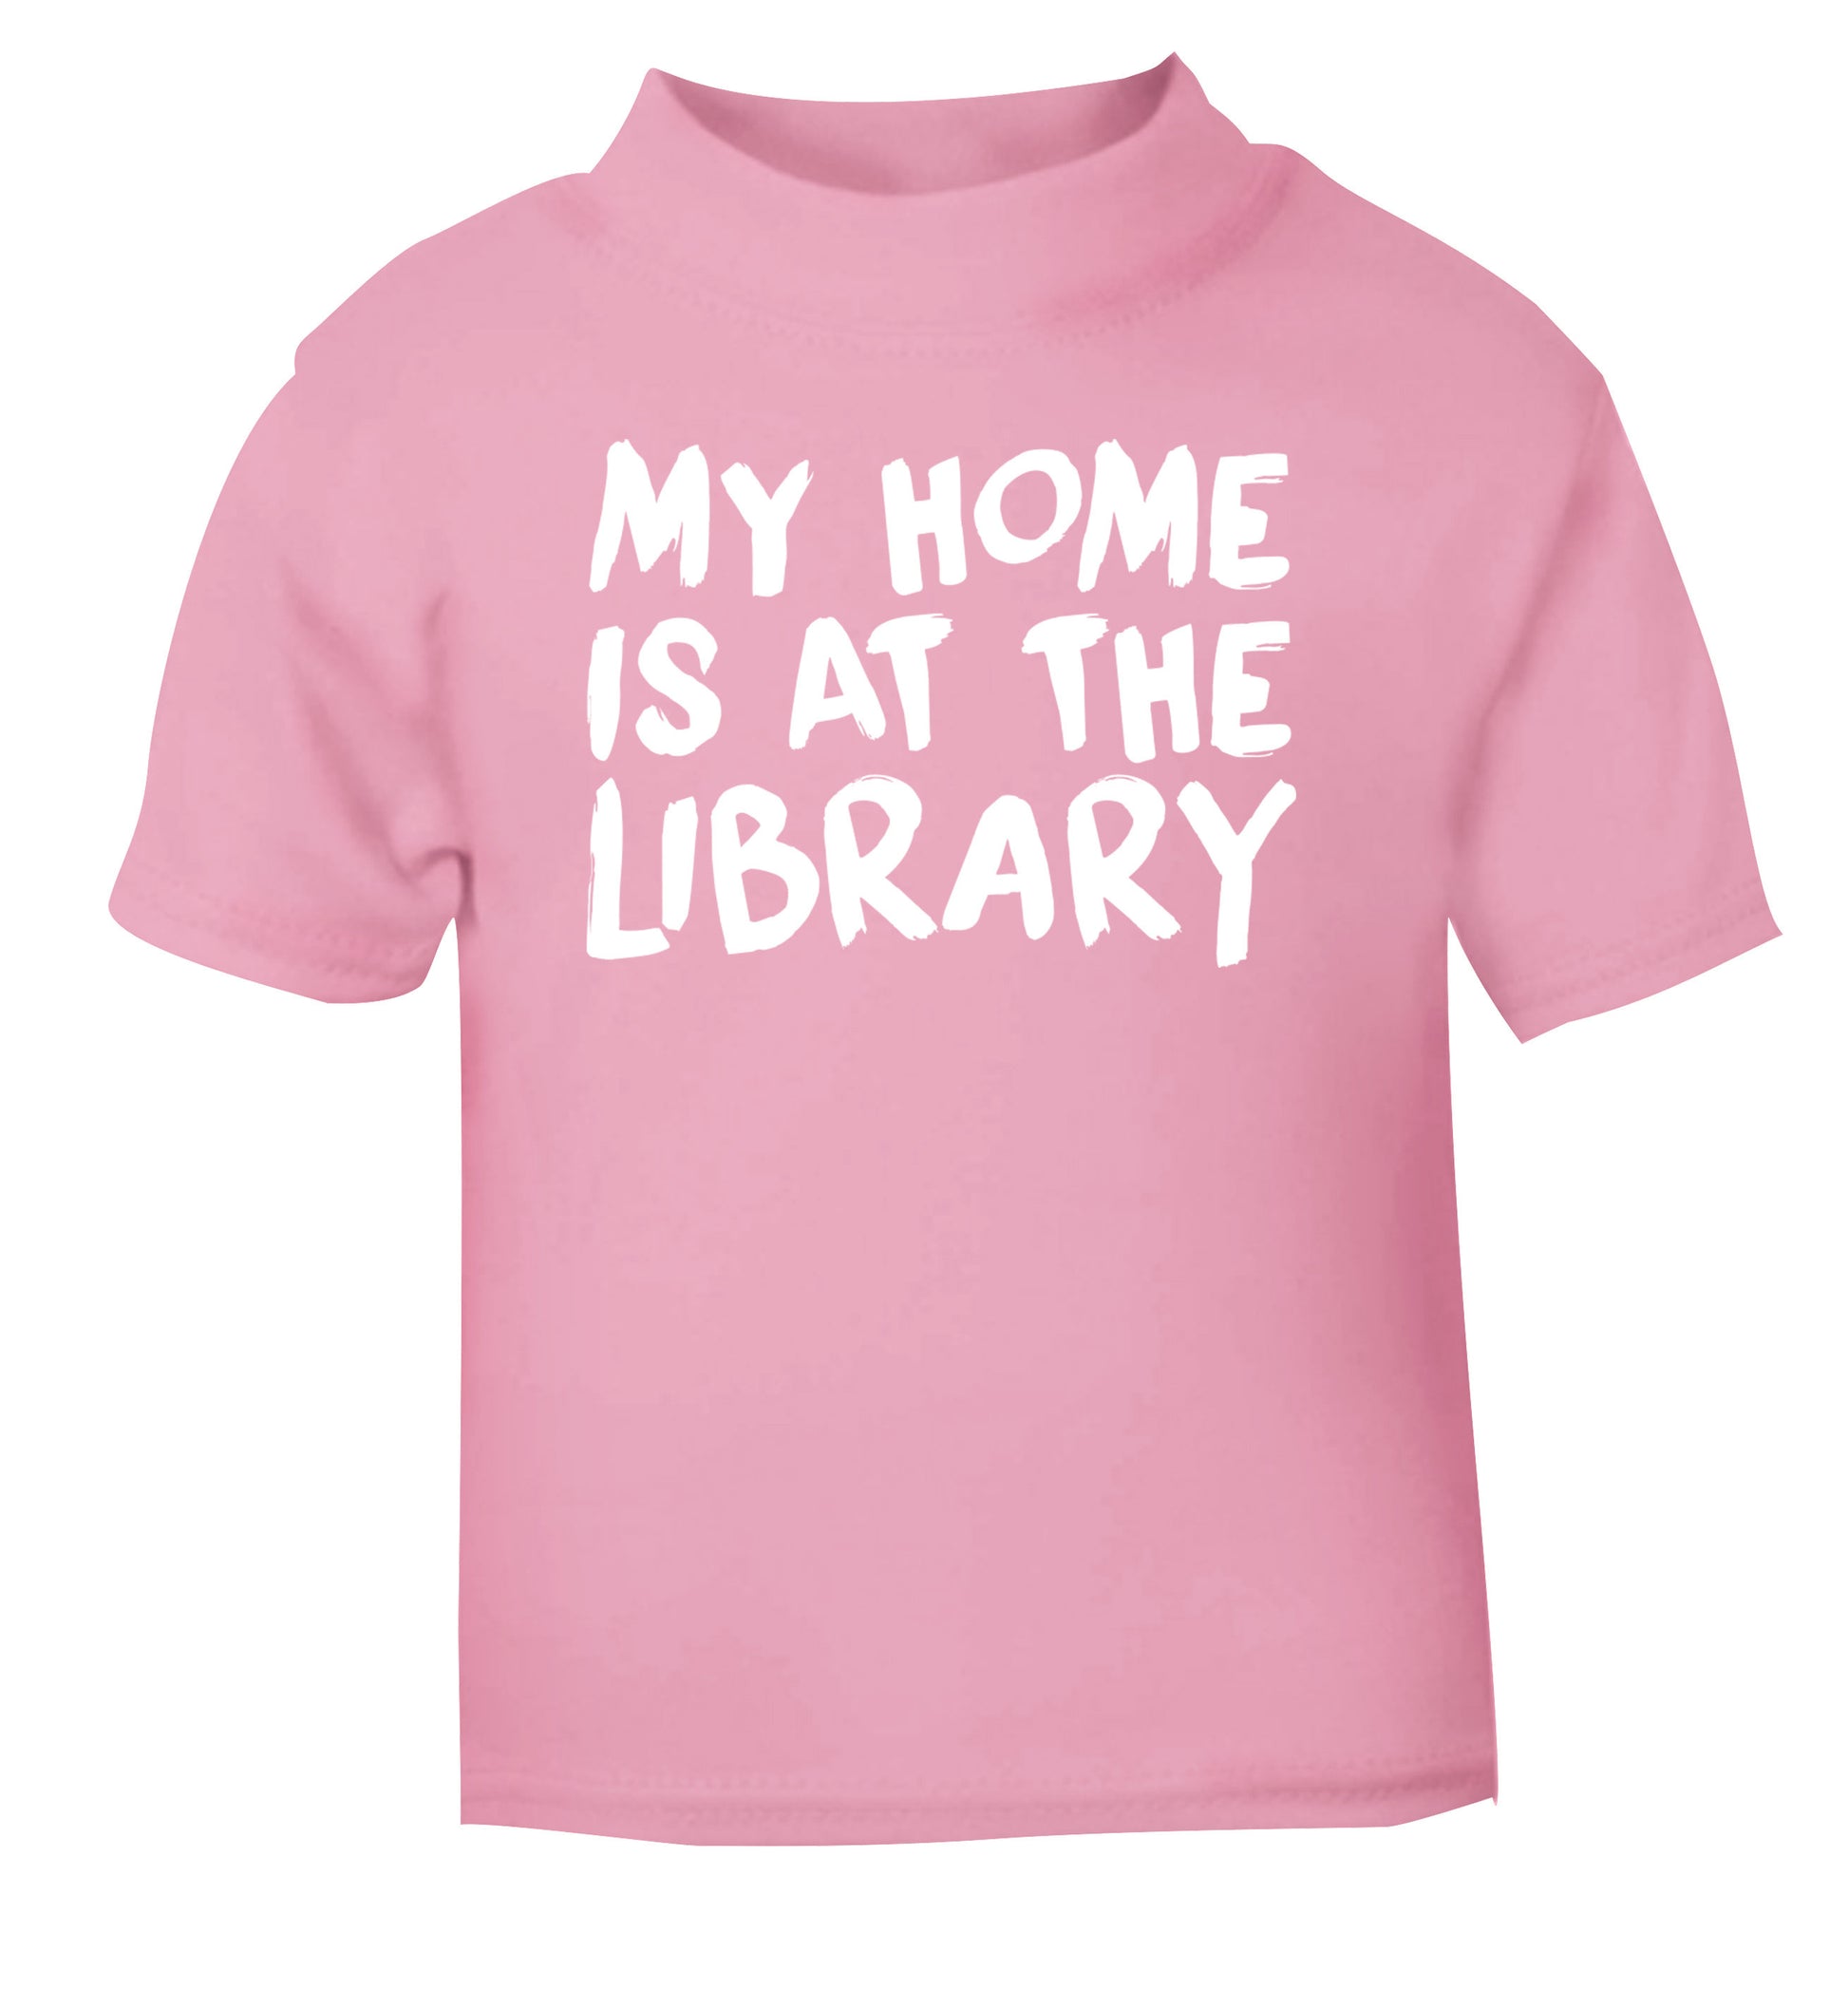 My home is at the library light pink Baby Toddler Tshirt 2 Years